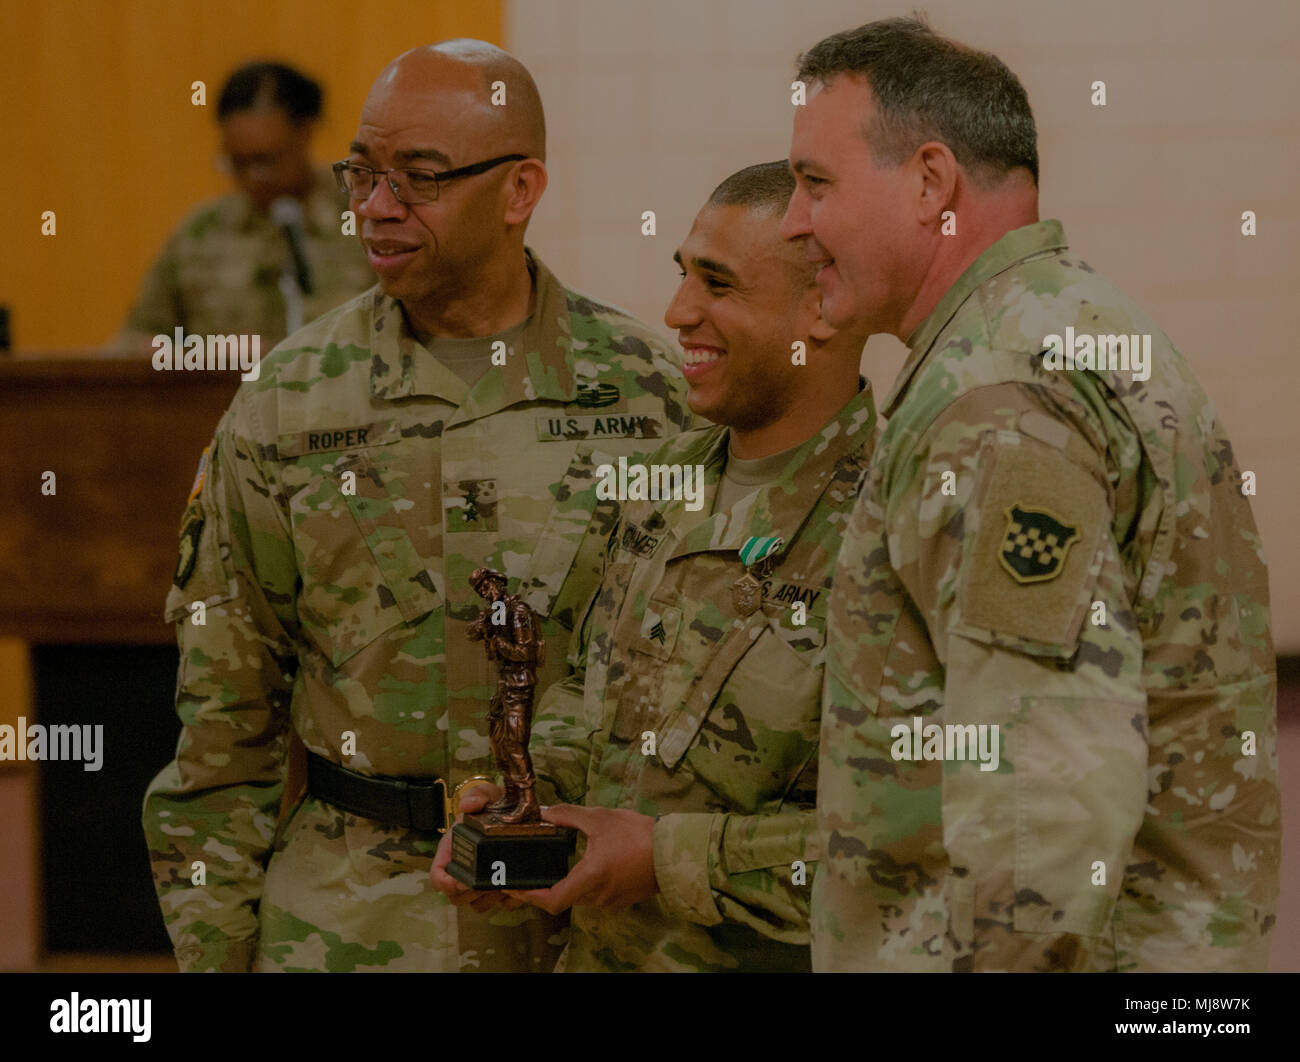 Sergeant Aaron Chavers (center), attached to the 198th Army Band, 99th Readiness Division, stands next to Maj. Gen. A. C. Roper, Commanding General of the 76th Operational Response Command (left) and Command Sgt. Maj. Arlindo Almeida, senior noncommissioned officer of the 99th Readiness Division (right), at Devens Reserve Forces Training Area in Massachusetts, April 19, 2018. Chavers earns the title best warrior, for his command, in the Major Command-level Best Warrior Competition. (U.S. Army Reserve photo by Pvt. Hunter E. Eastman) (Photo cropped and edited for effect.) Stock Photo